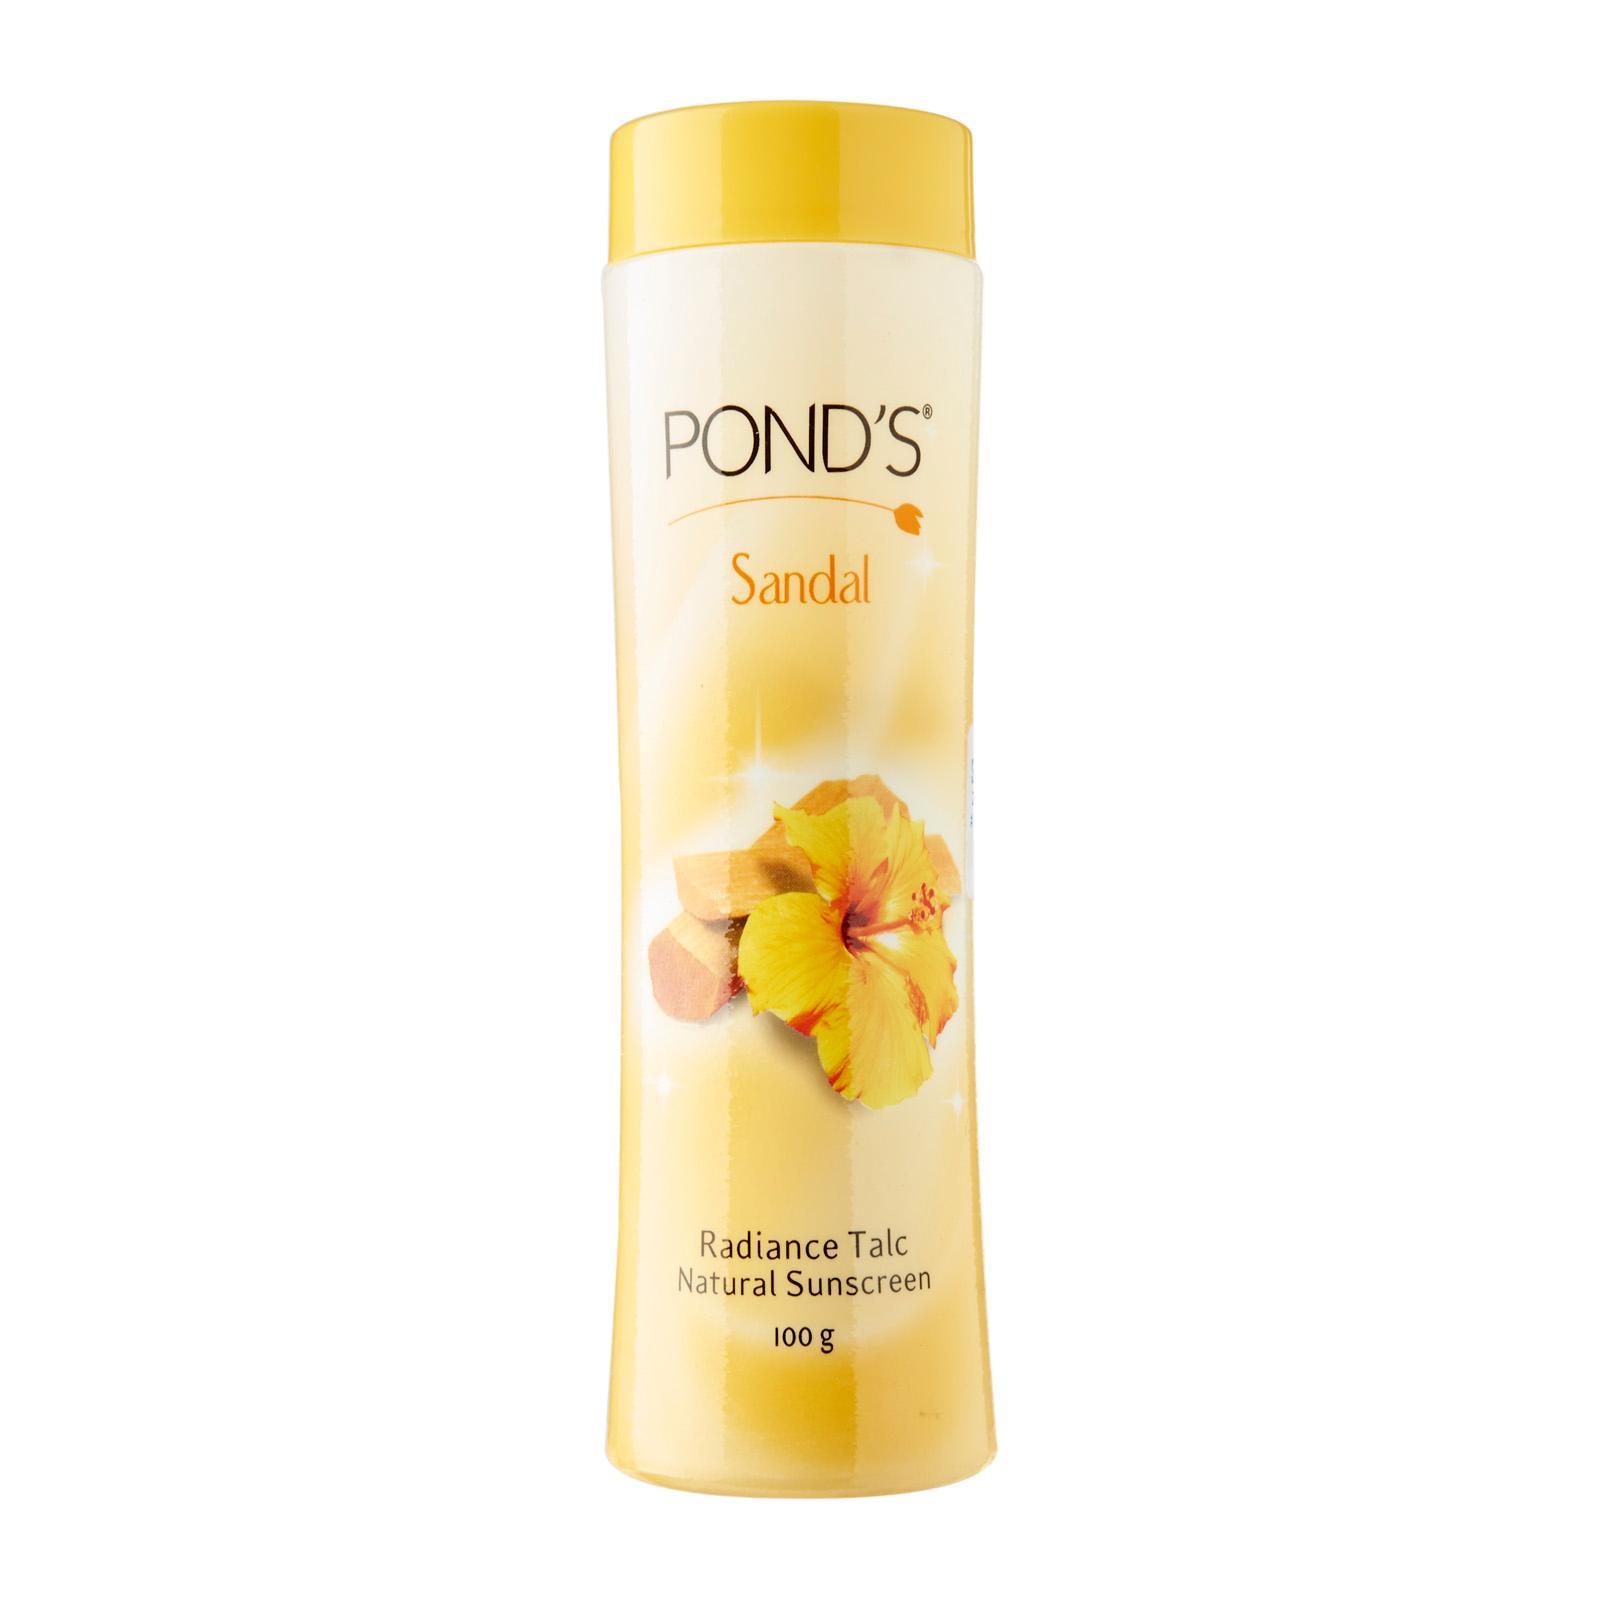 Pond's Sandal Radiance Talc Powder, 50 gm Price, Uses, Side Effects,  Composition - Apollo Pharmacy